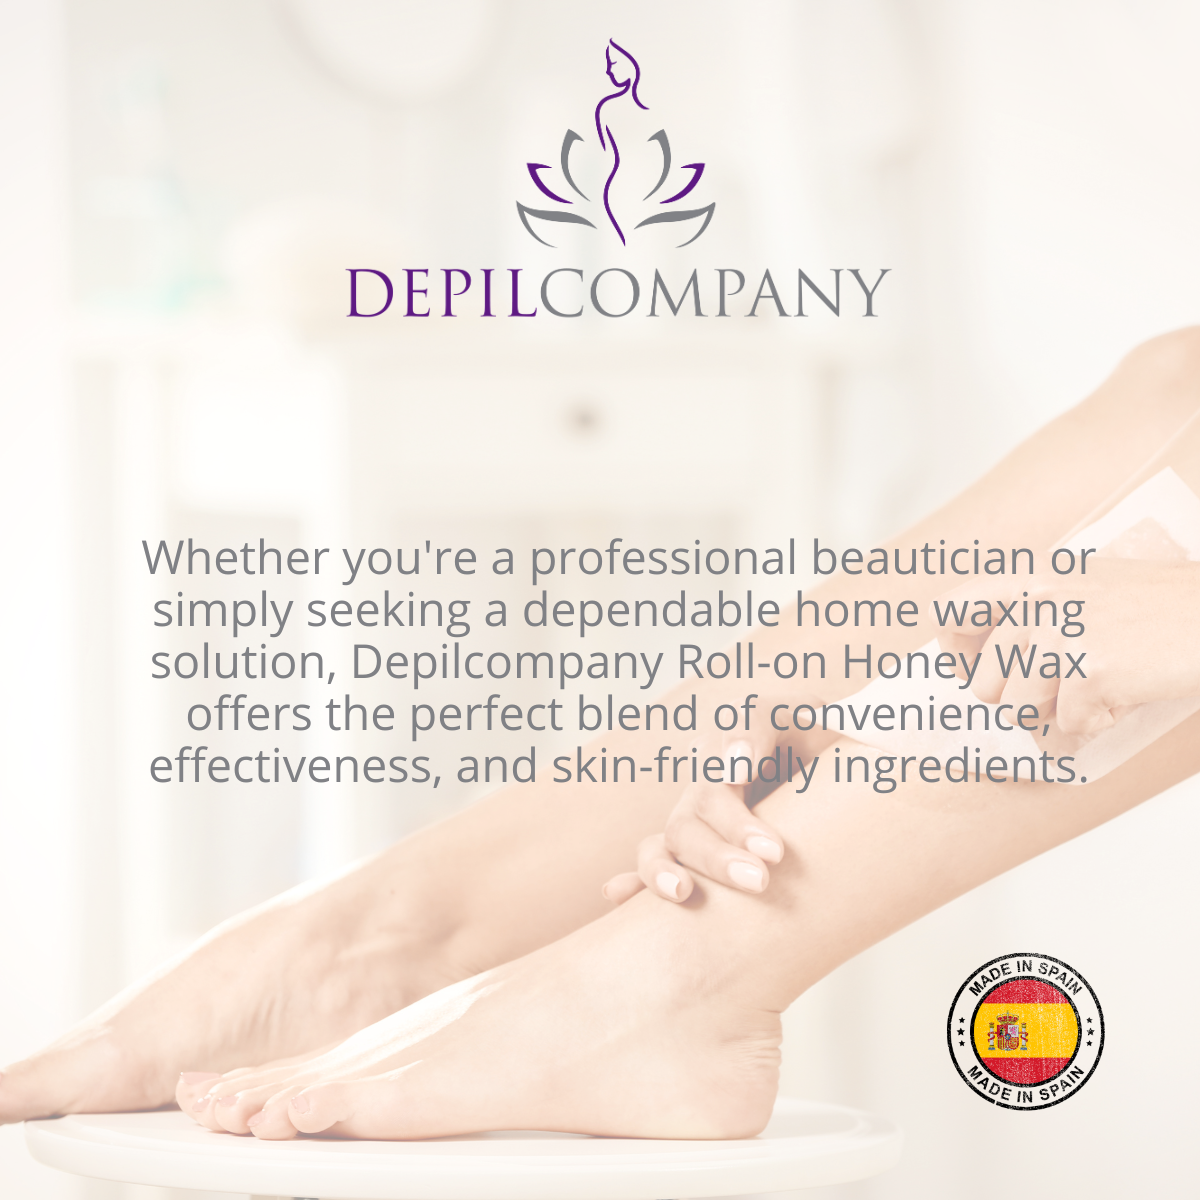 Depilcompany Roll-on Honey Wax offers the perfect blend of convenience, effectiveness, and skin-friendly ingredients for professional beauticians and home waxing